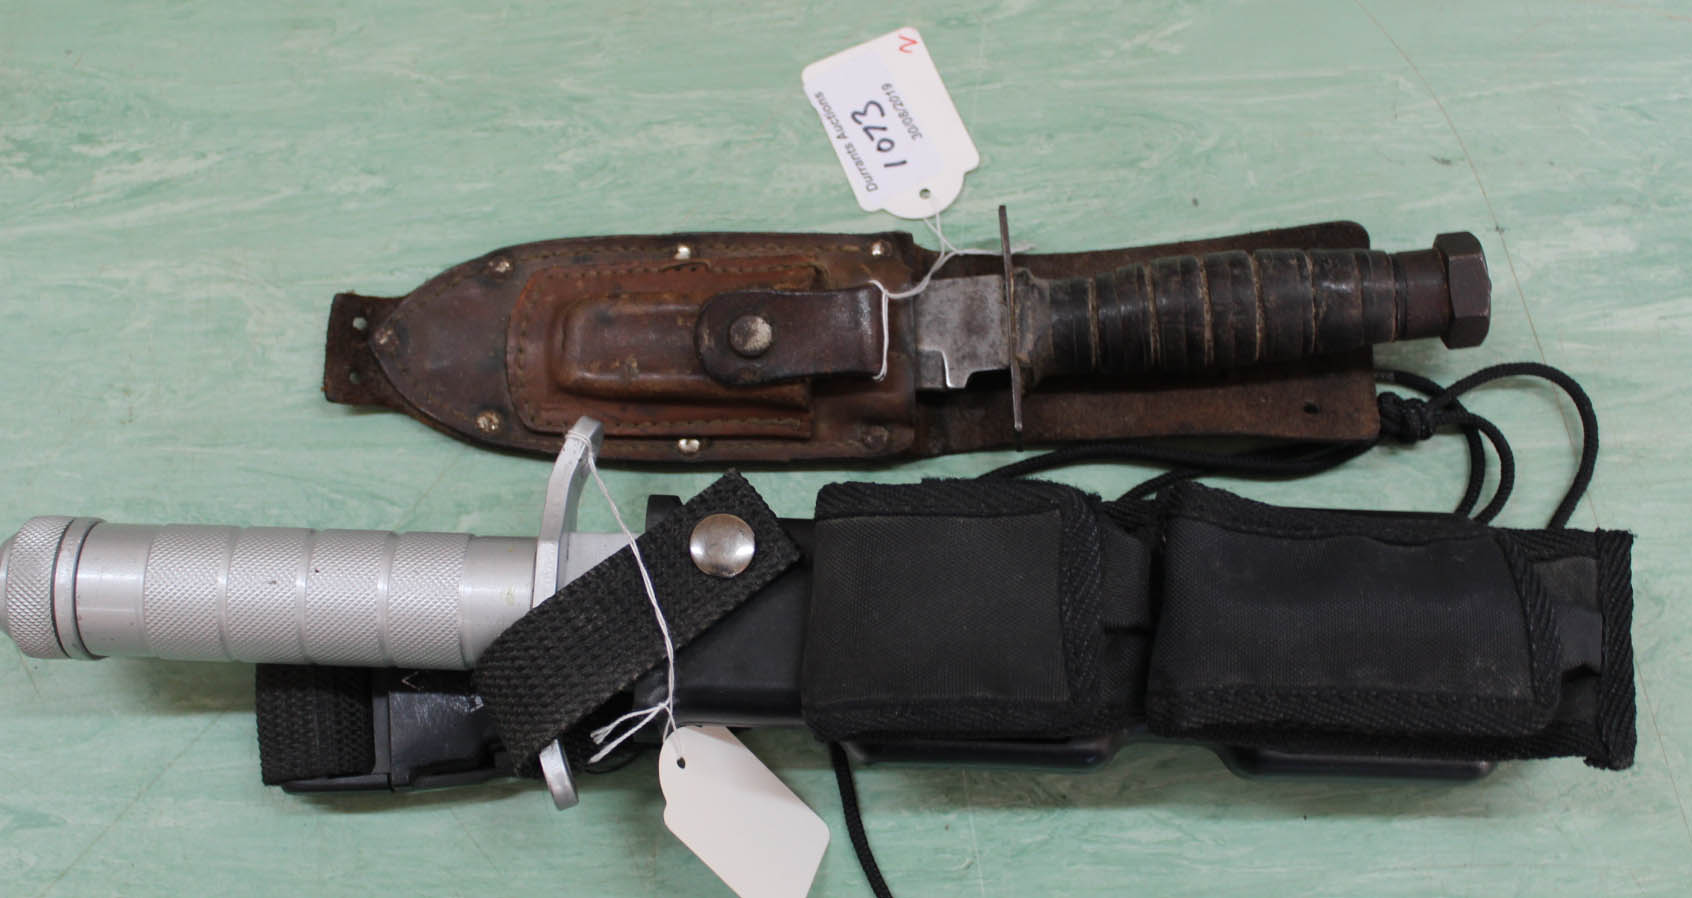 A modern stainless steel survival knife with sheath and accessories with a vintage sheath knife